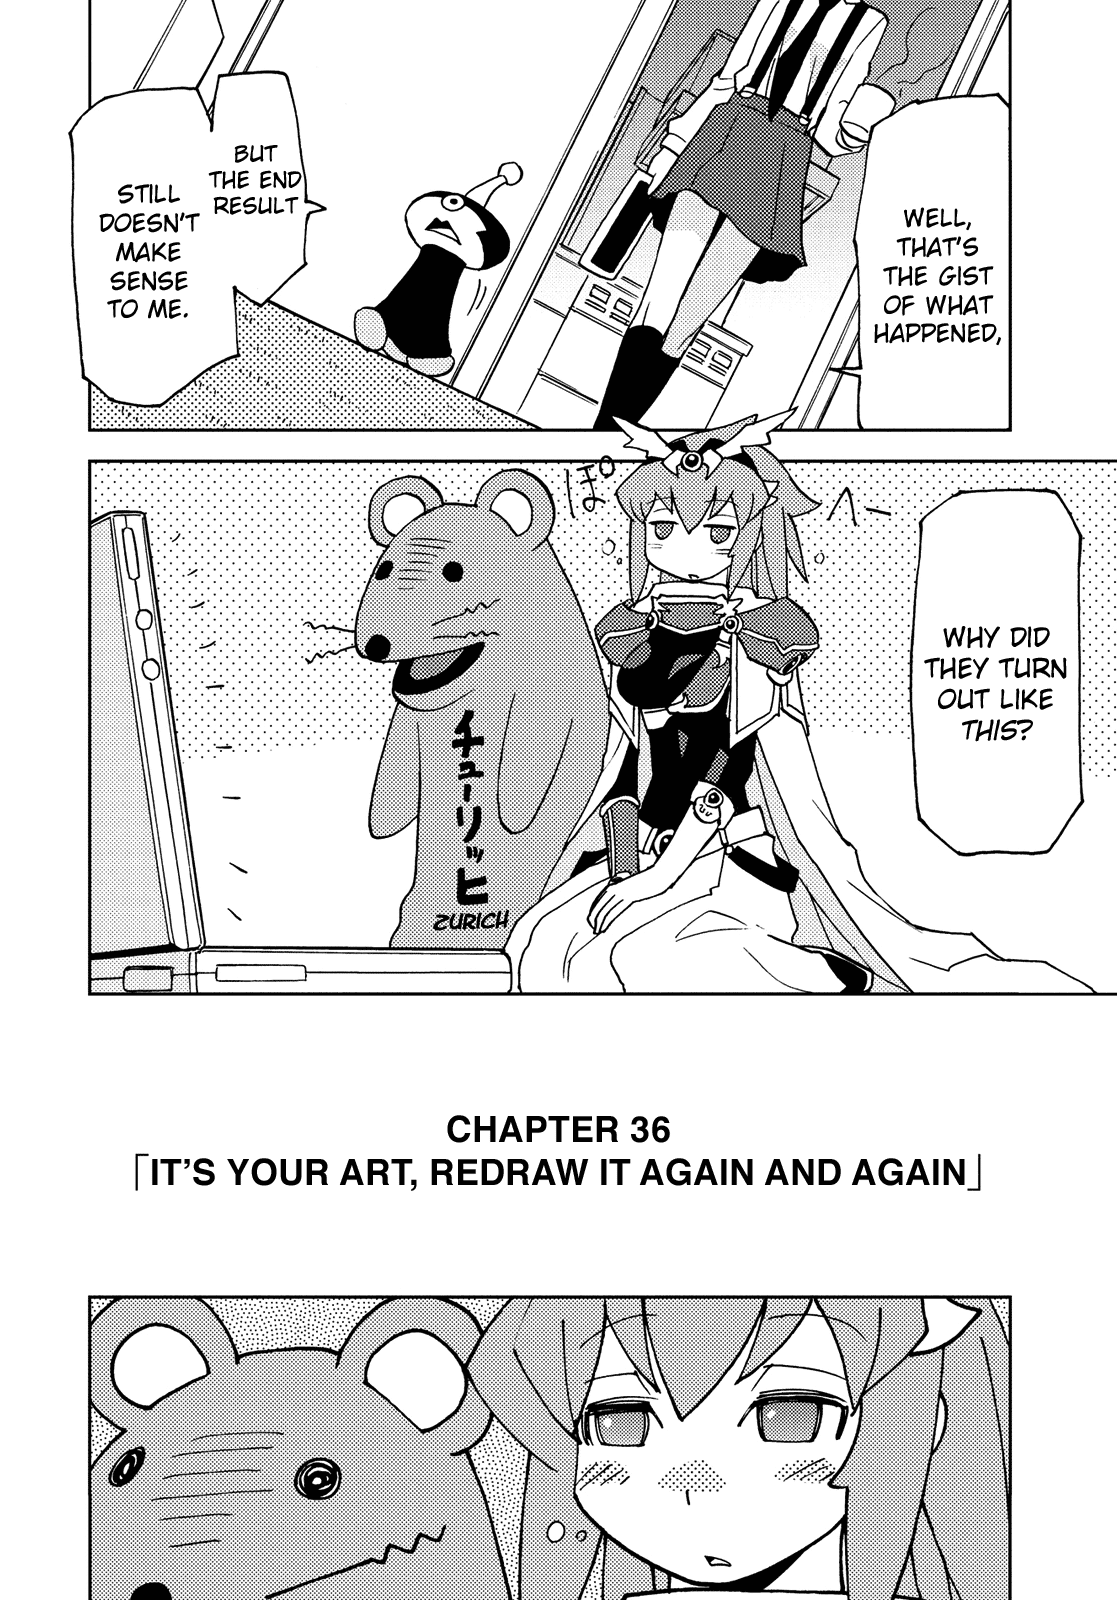 Choukadou Girl 1/6 Vol.4 Chapter 36: It's Your Art, Redraw It Again and Again